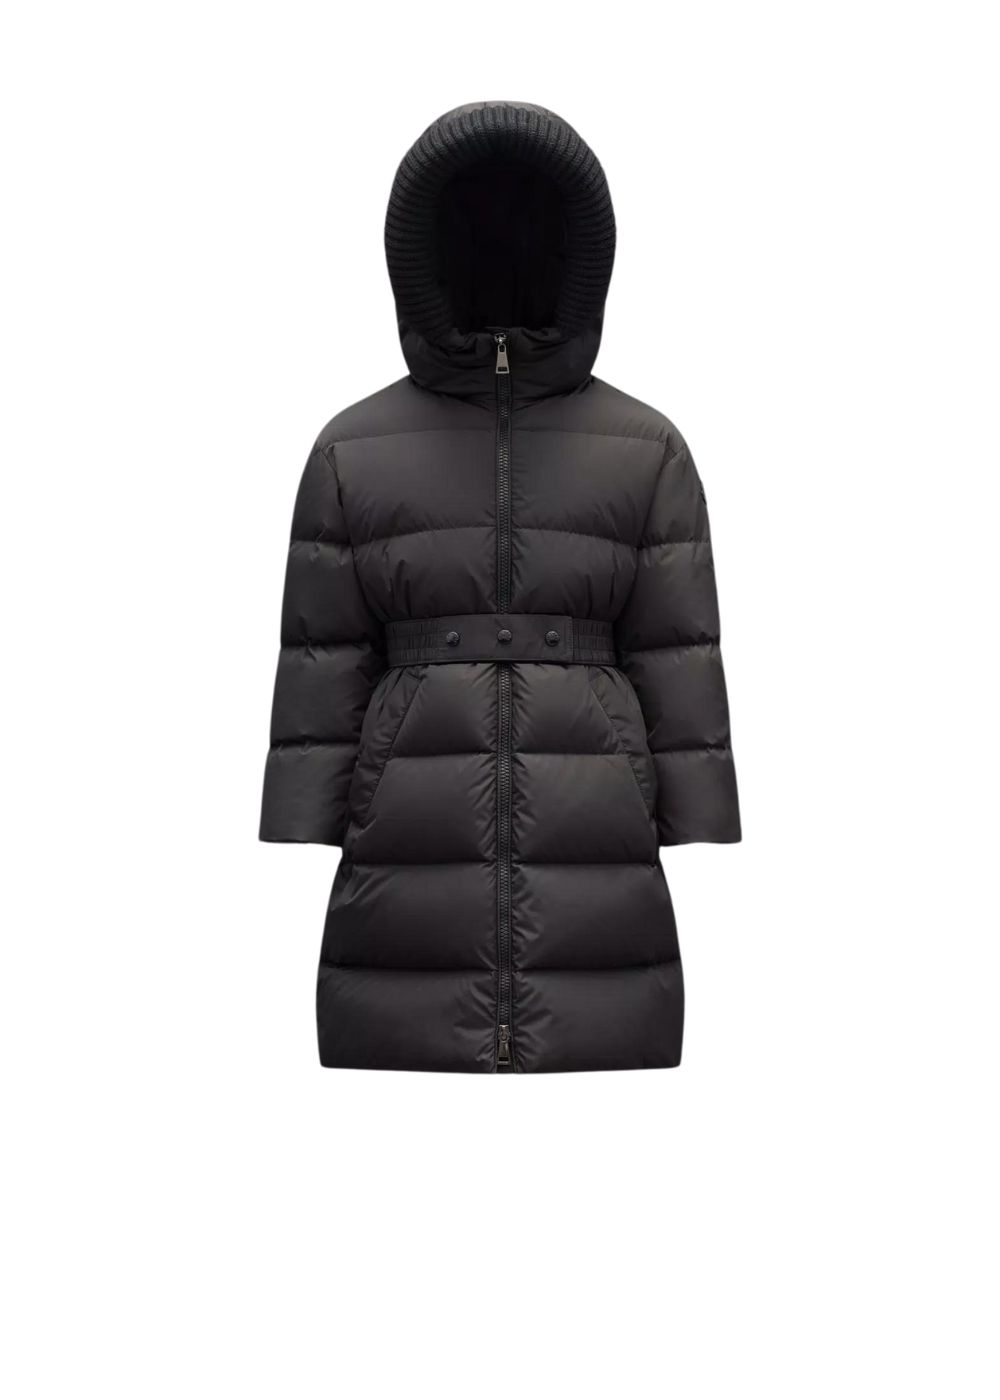 Featured image for “Moncler Piumino Chalain”